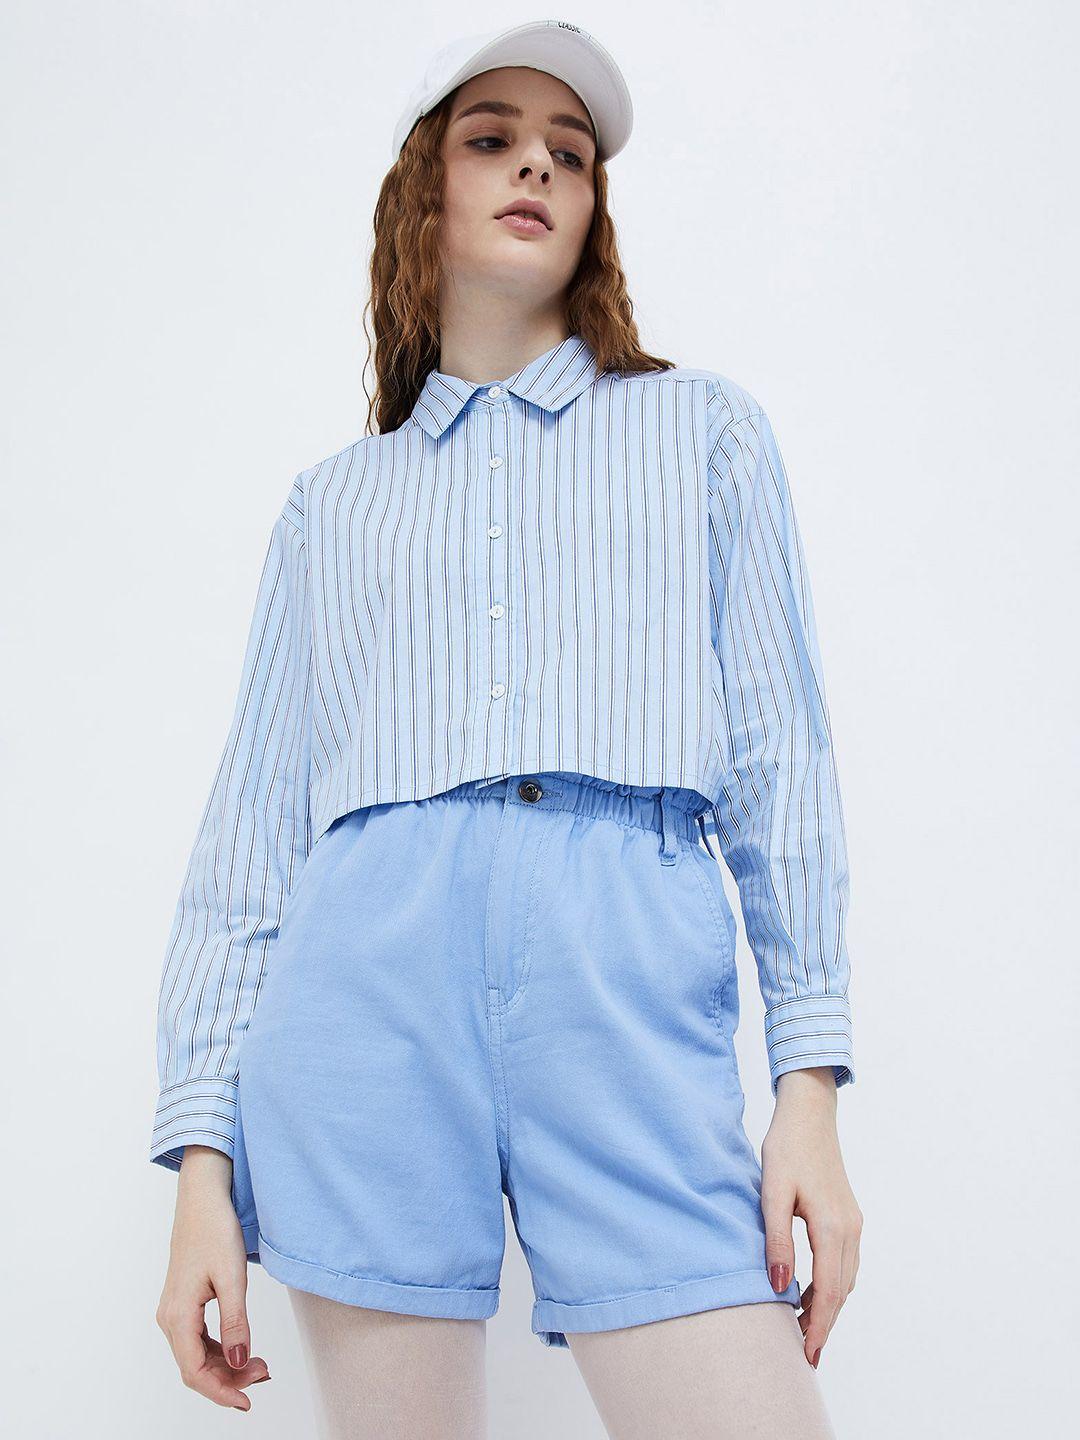 ginger-by-lifestyle-vertical-striped-spread-collar-pure-cotton-crop-casual-shirt